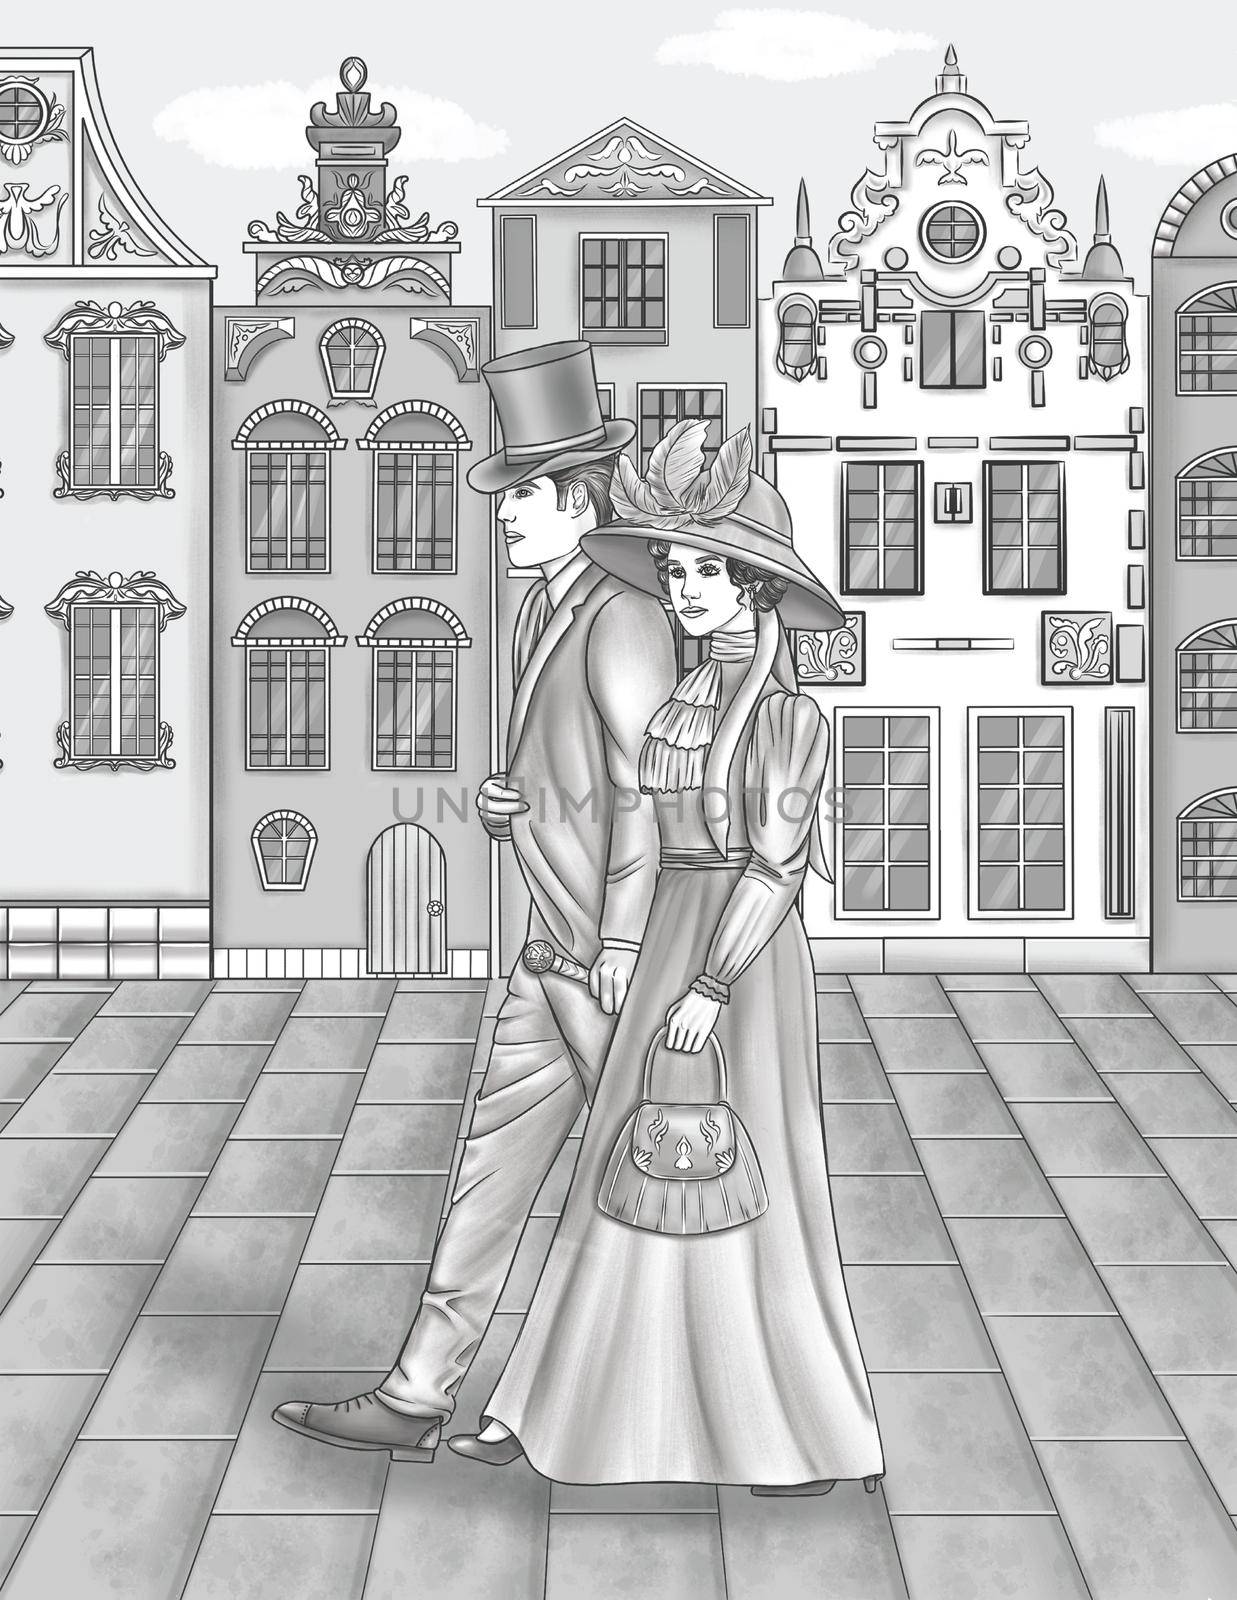 Man In Suite And Woman In Dress Walking On The Streets Tall Structures.